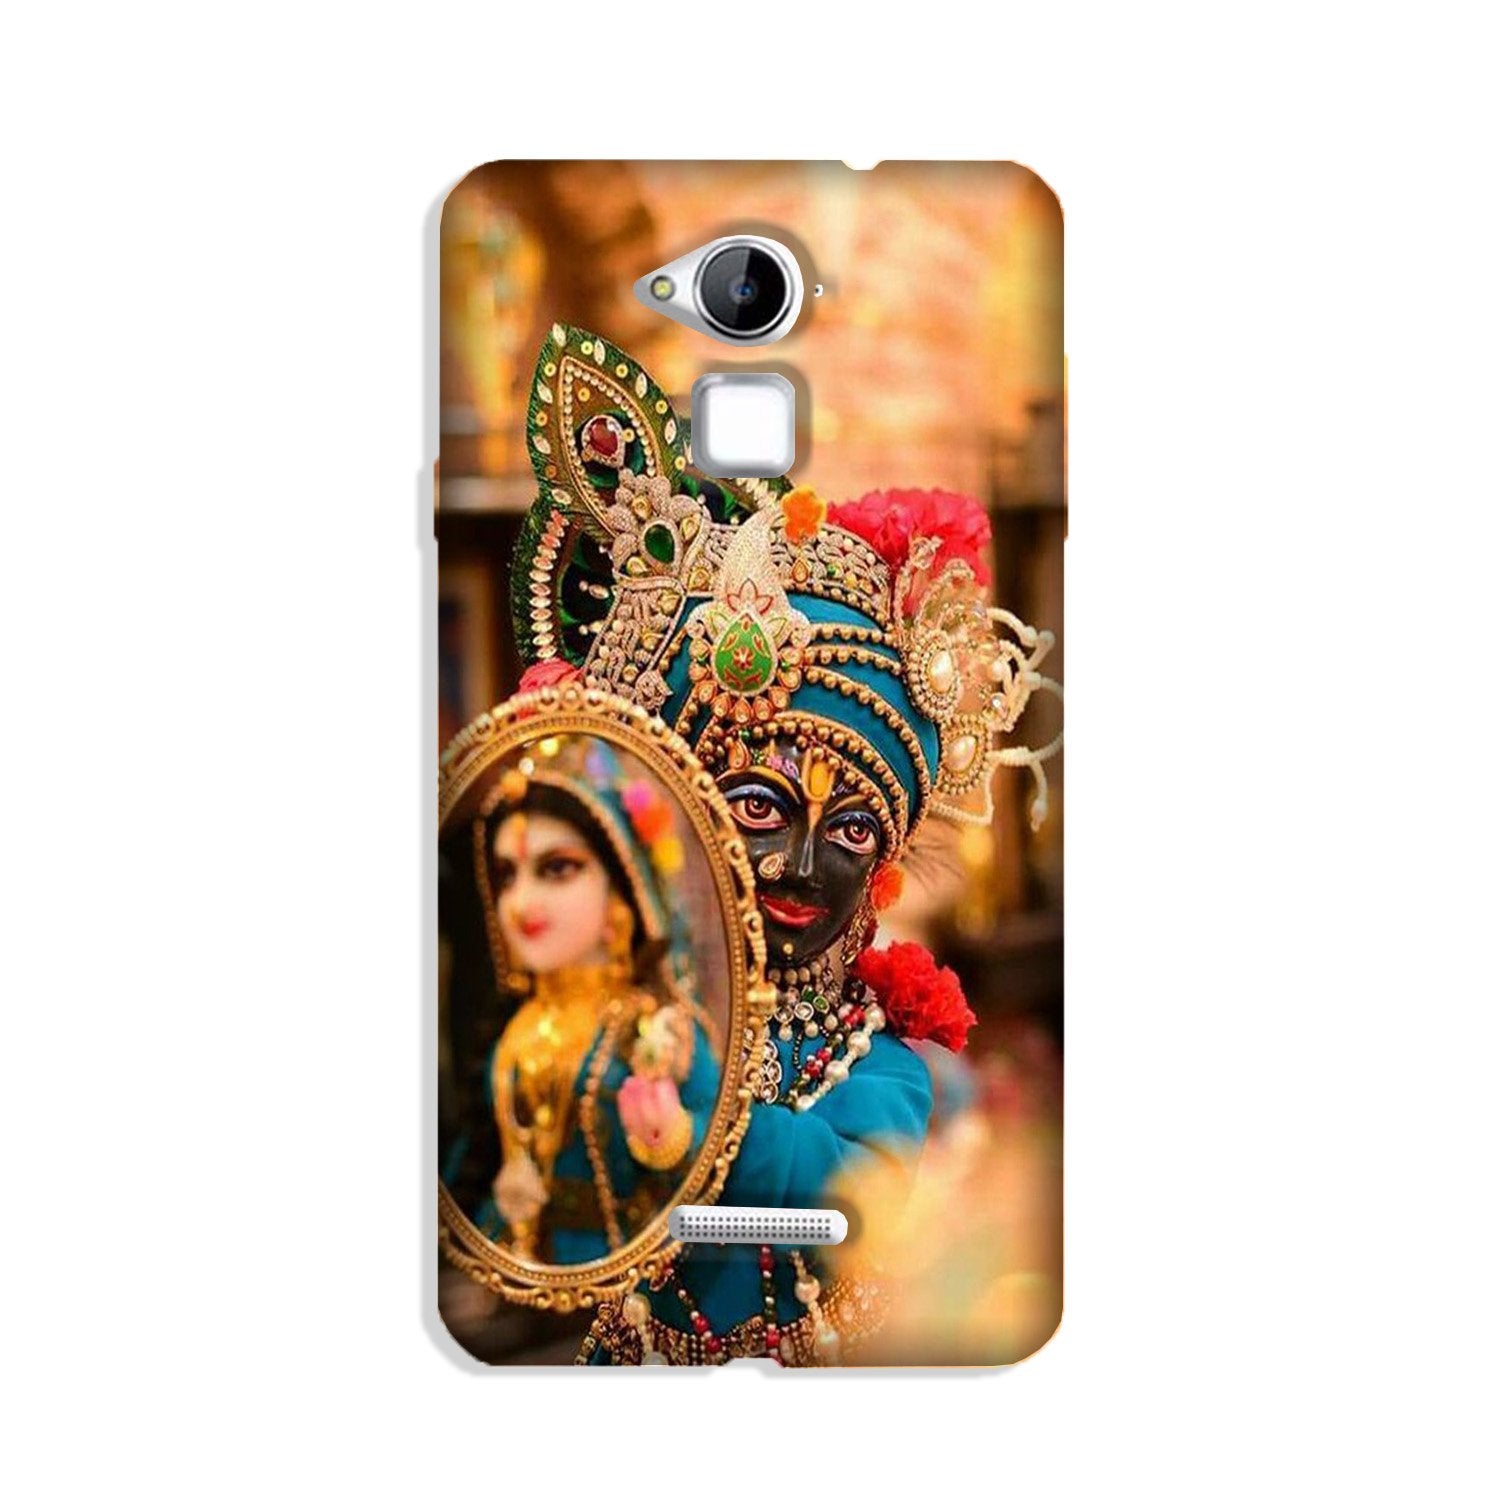 Lord Krishna5 Case for Coolpad Note 3